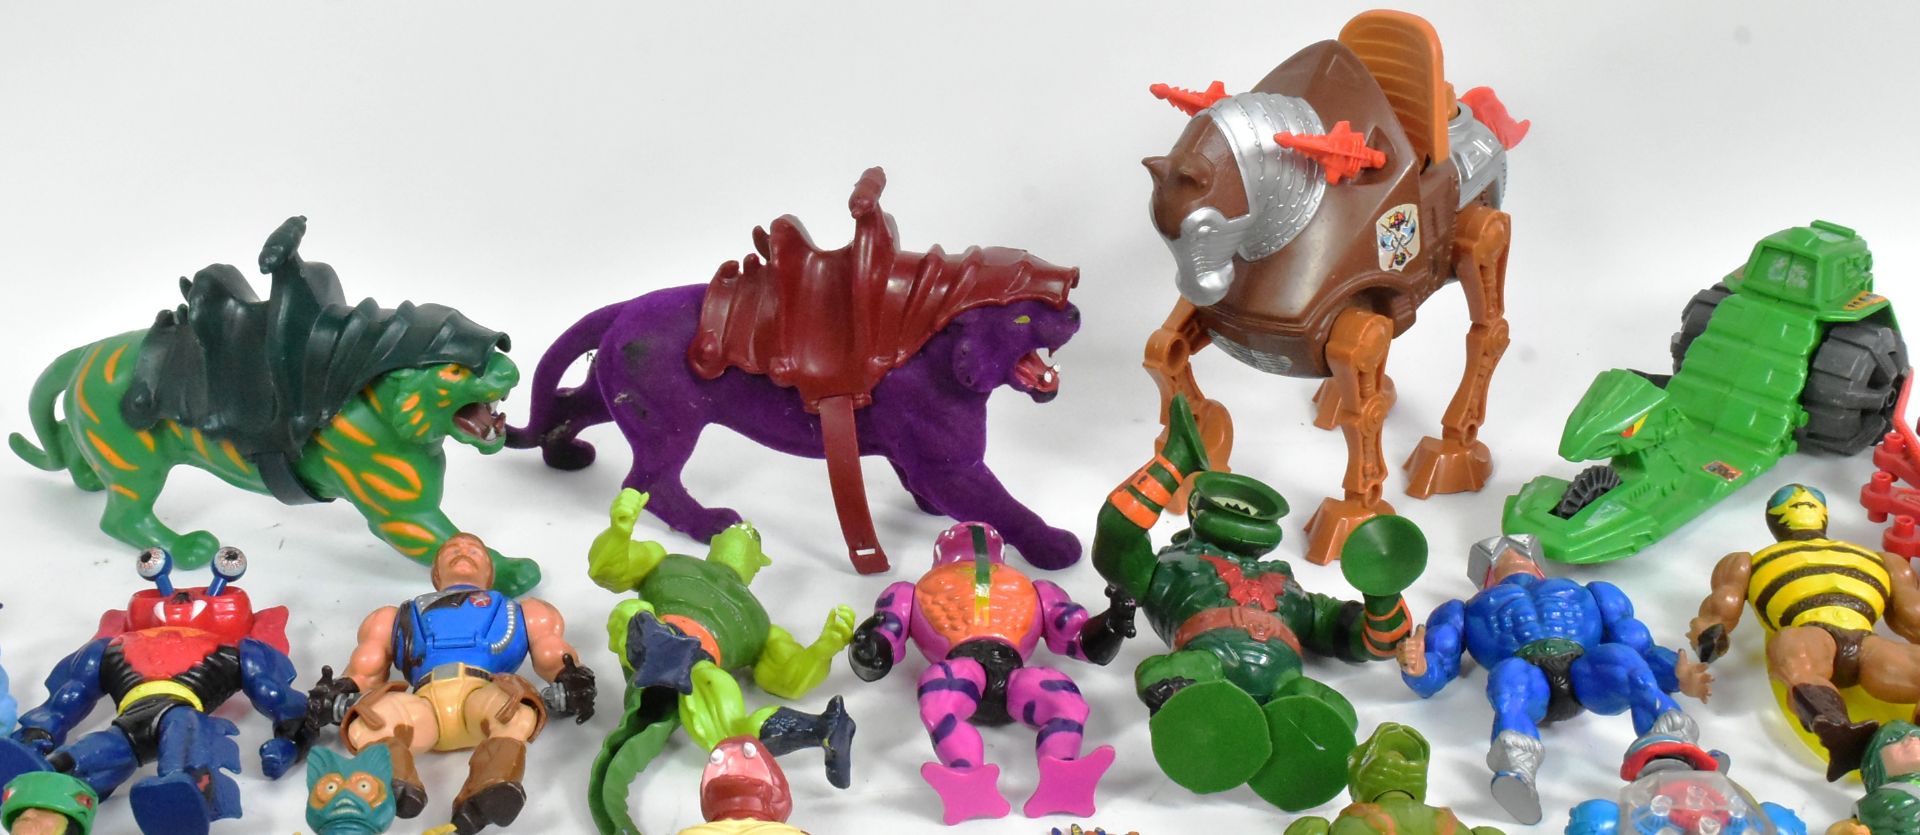 MASTERS OF THE UNIVERSE - MOTU - COLLECTION OF ACTION FIGURES - Image 6 of 6